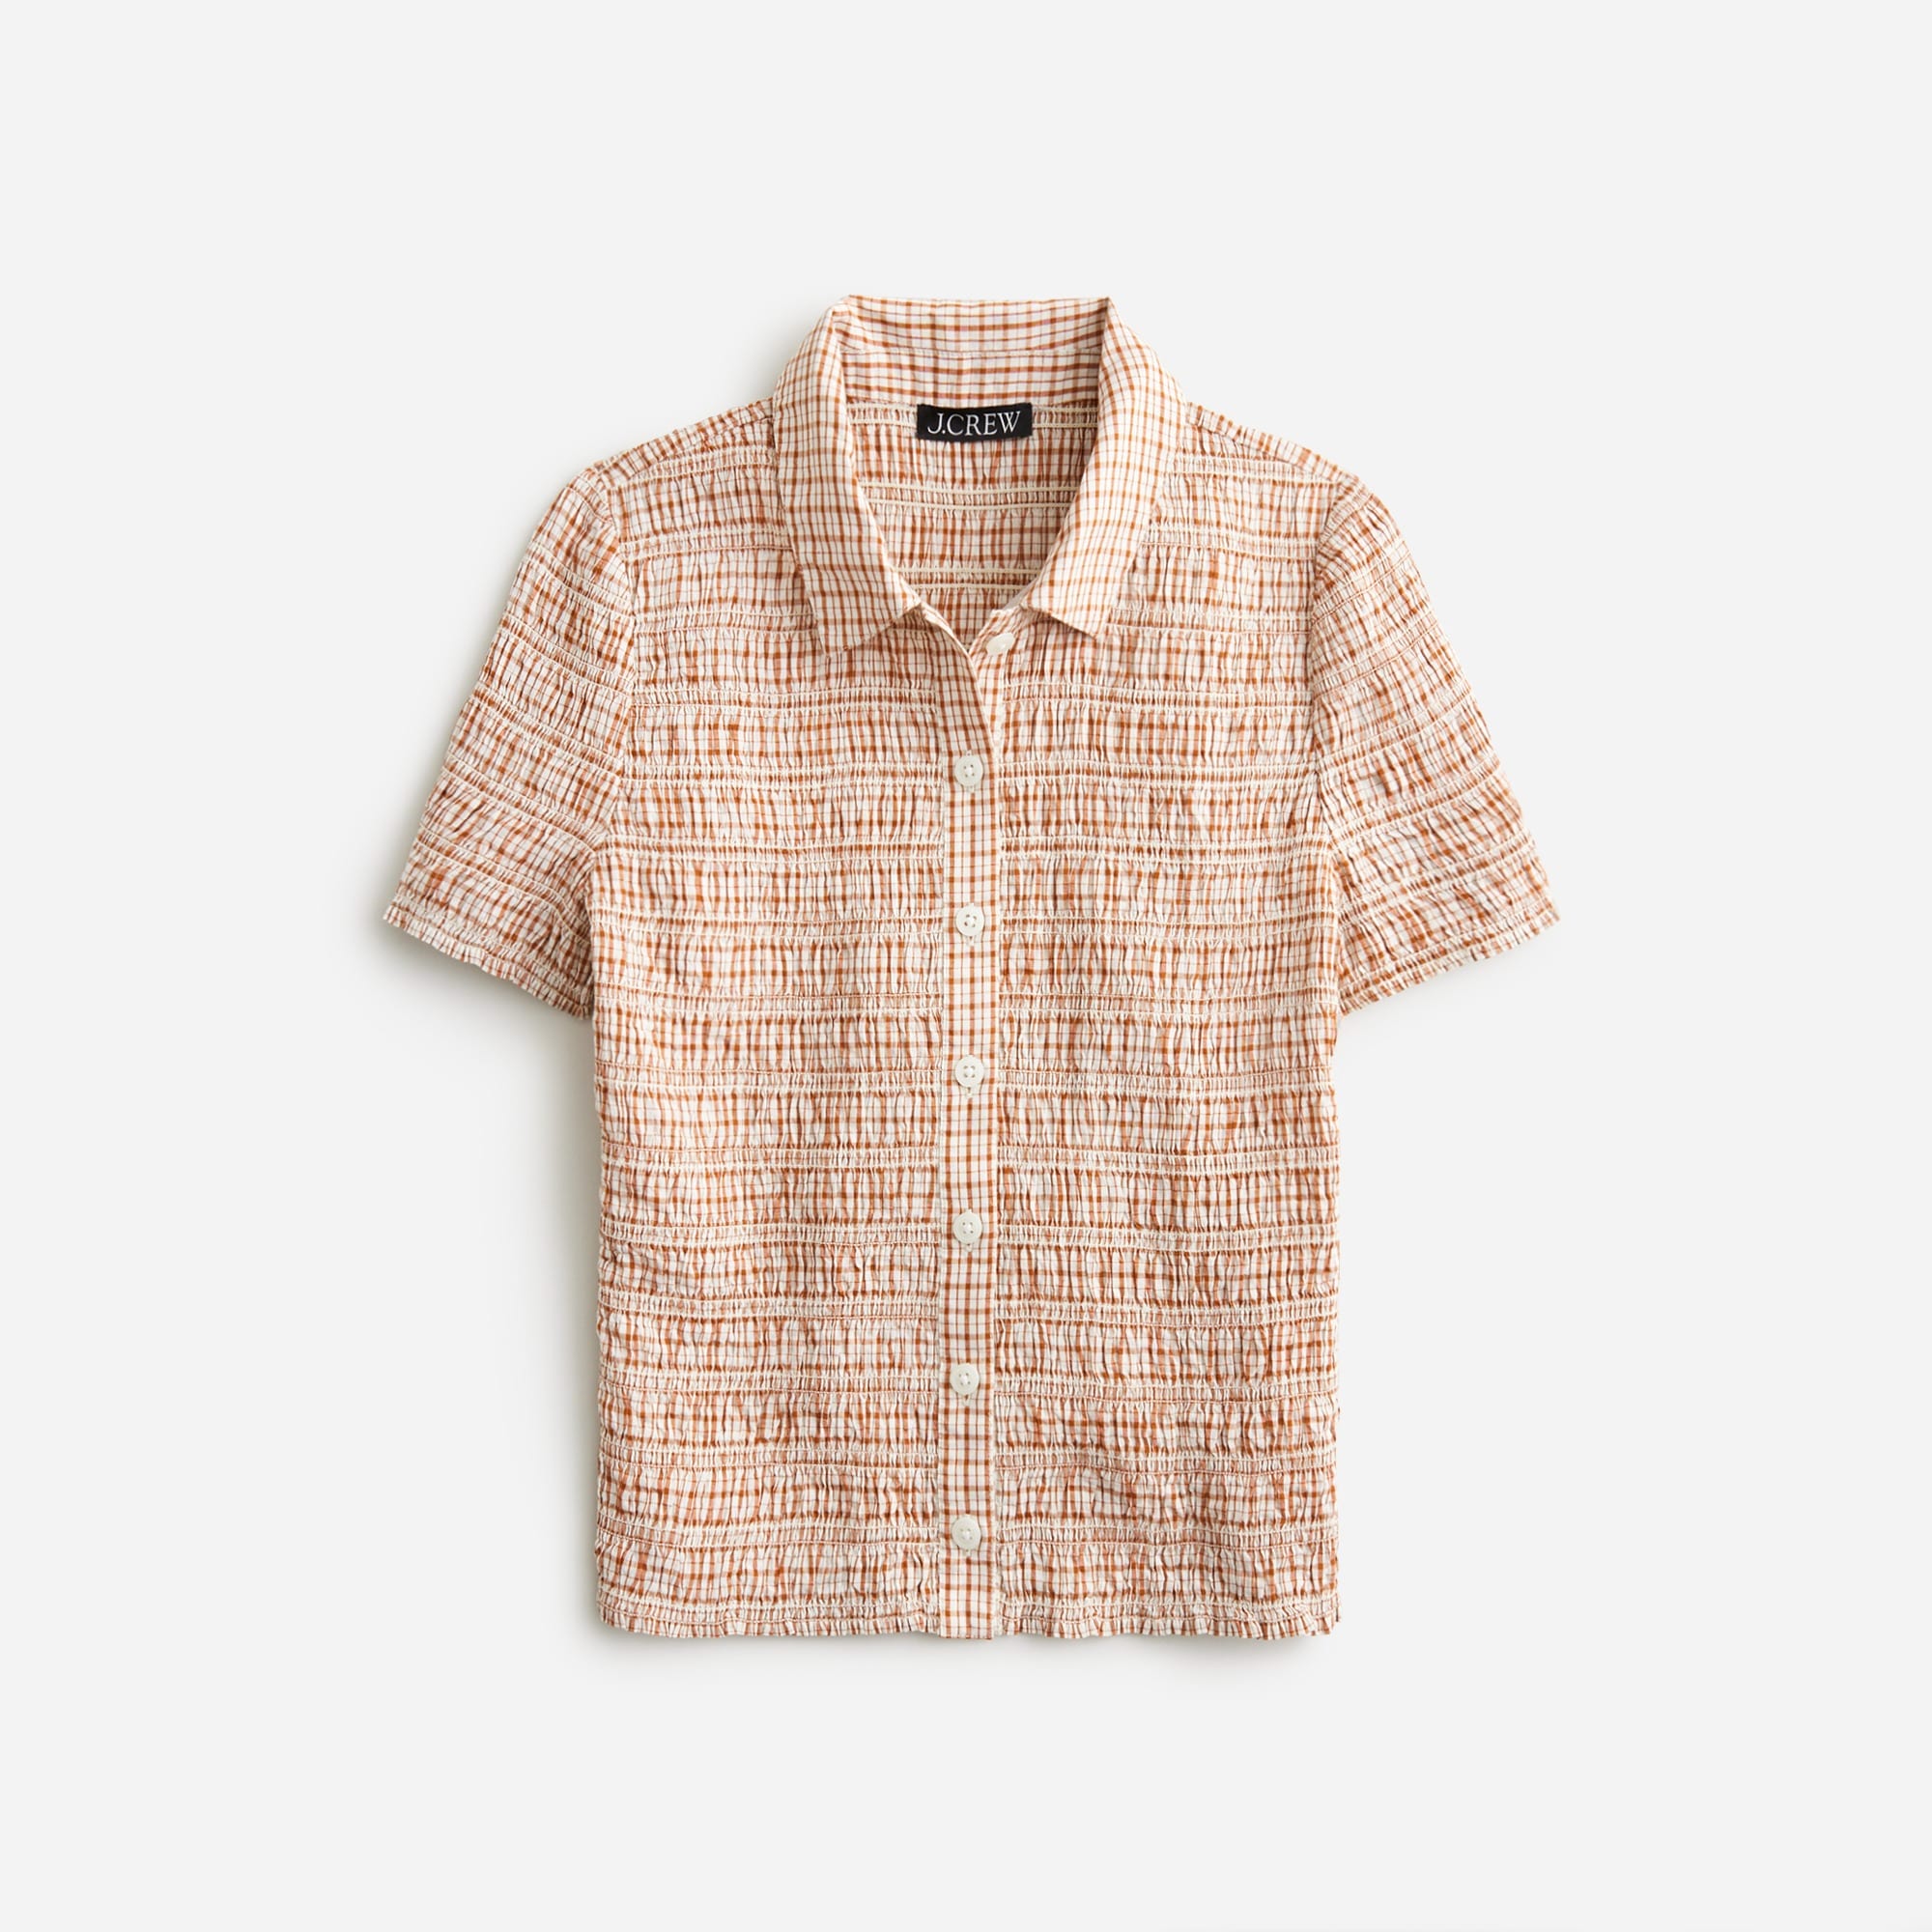  Smocked button-up shirt in gingham cotton voile